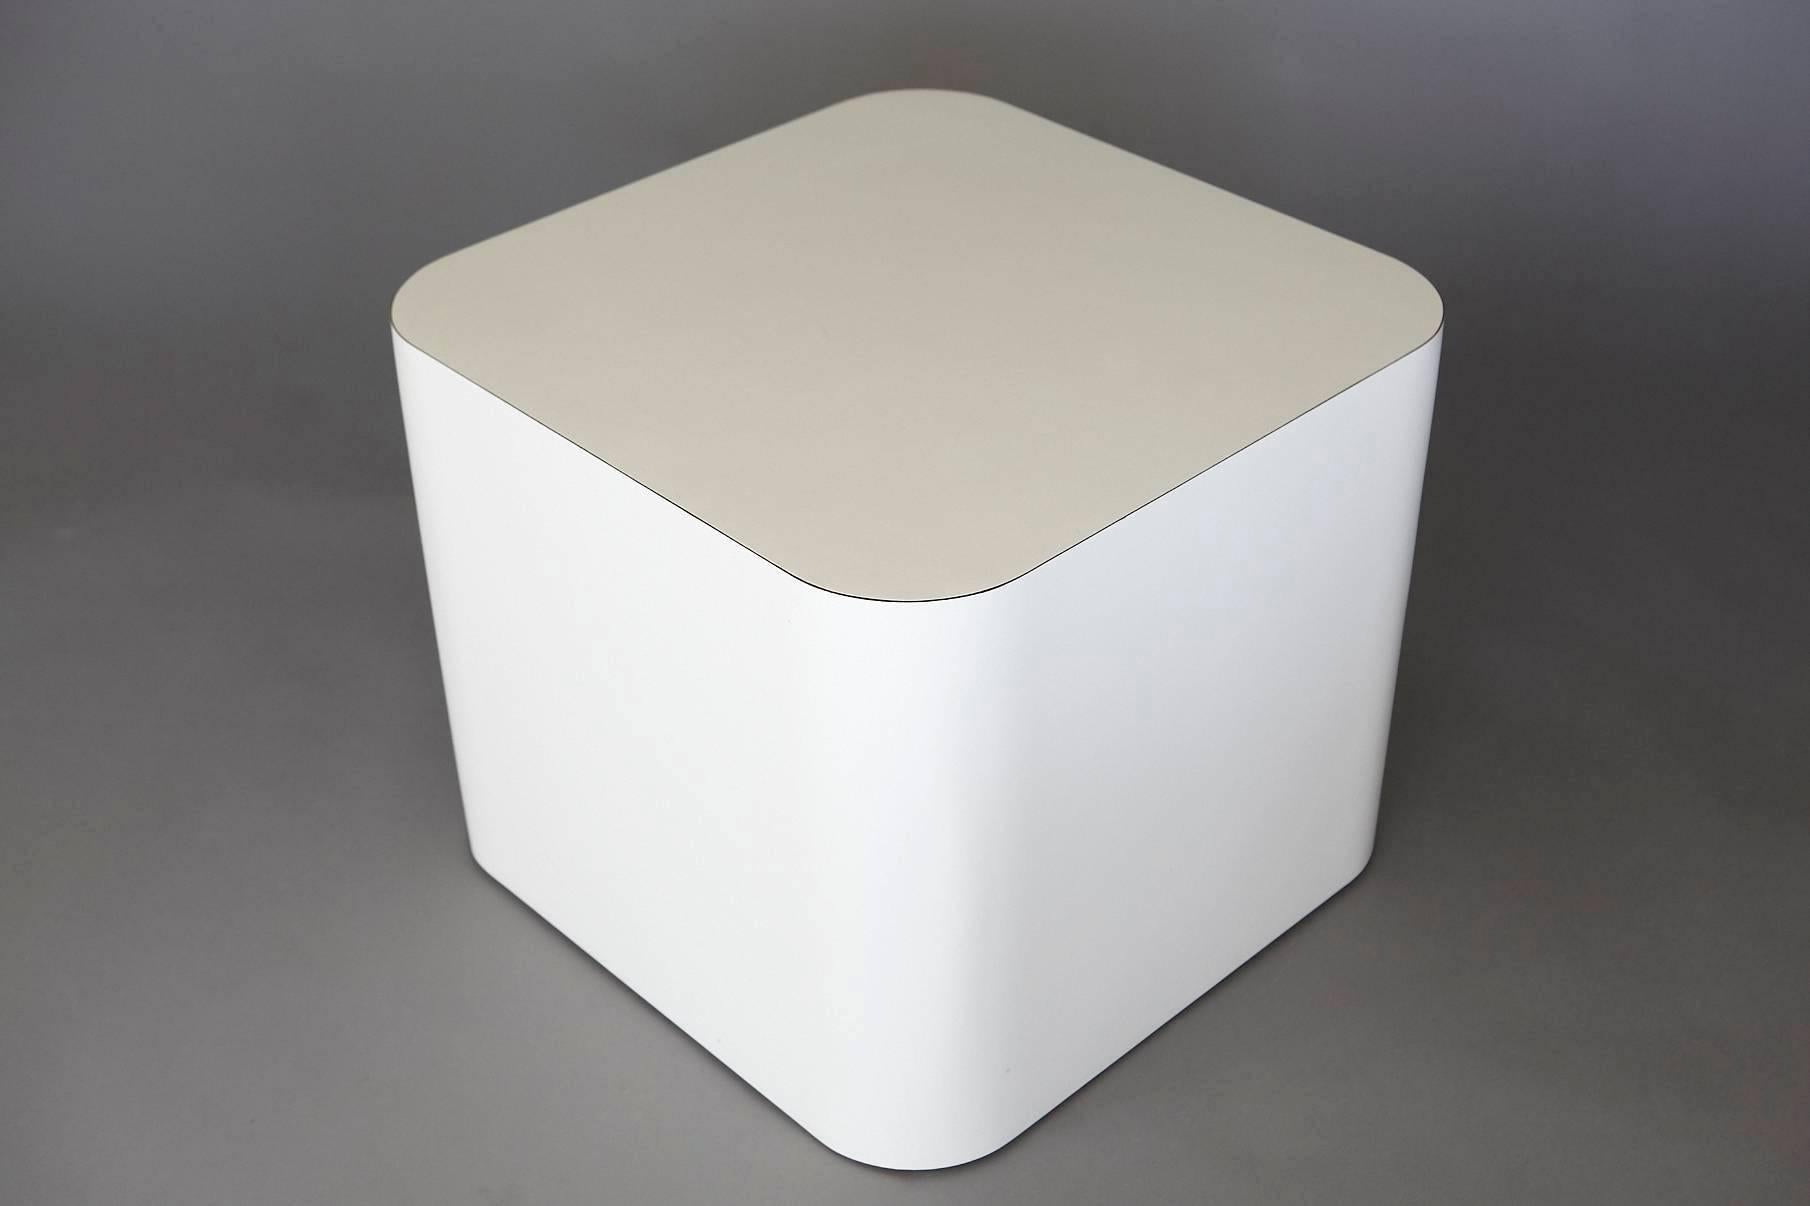 Late 20th Century Custom-Made Minimalistic White Laminate Cubic End Table or Pedestal, 1980s